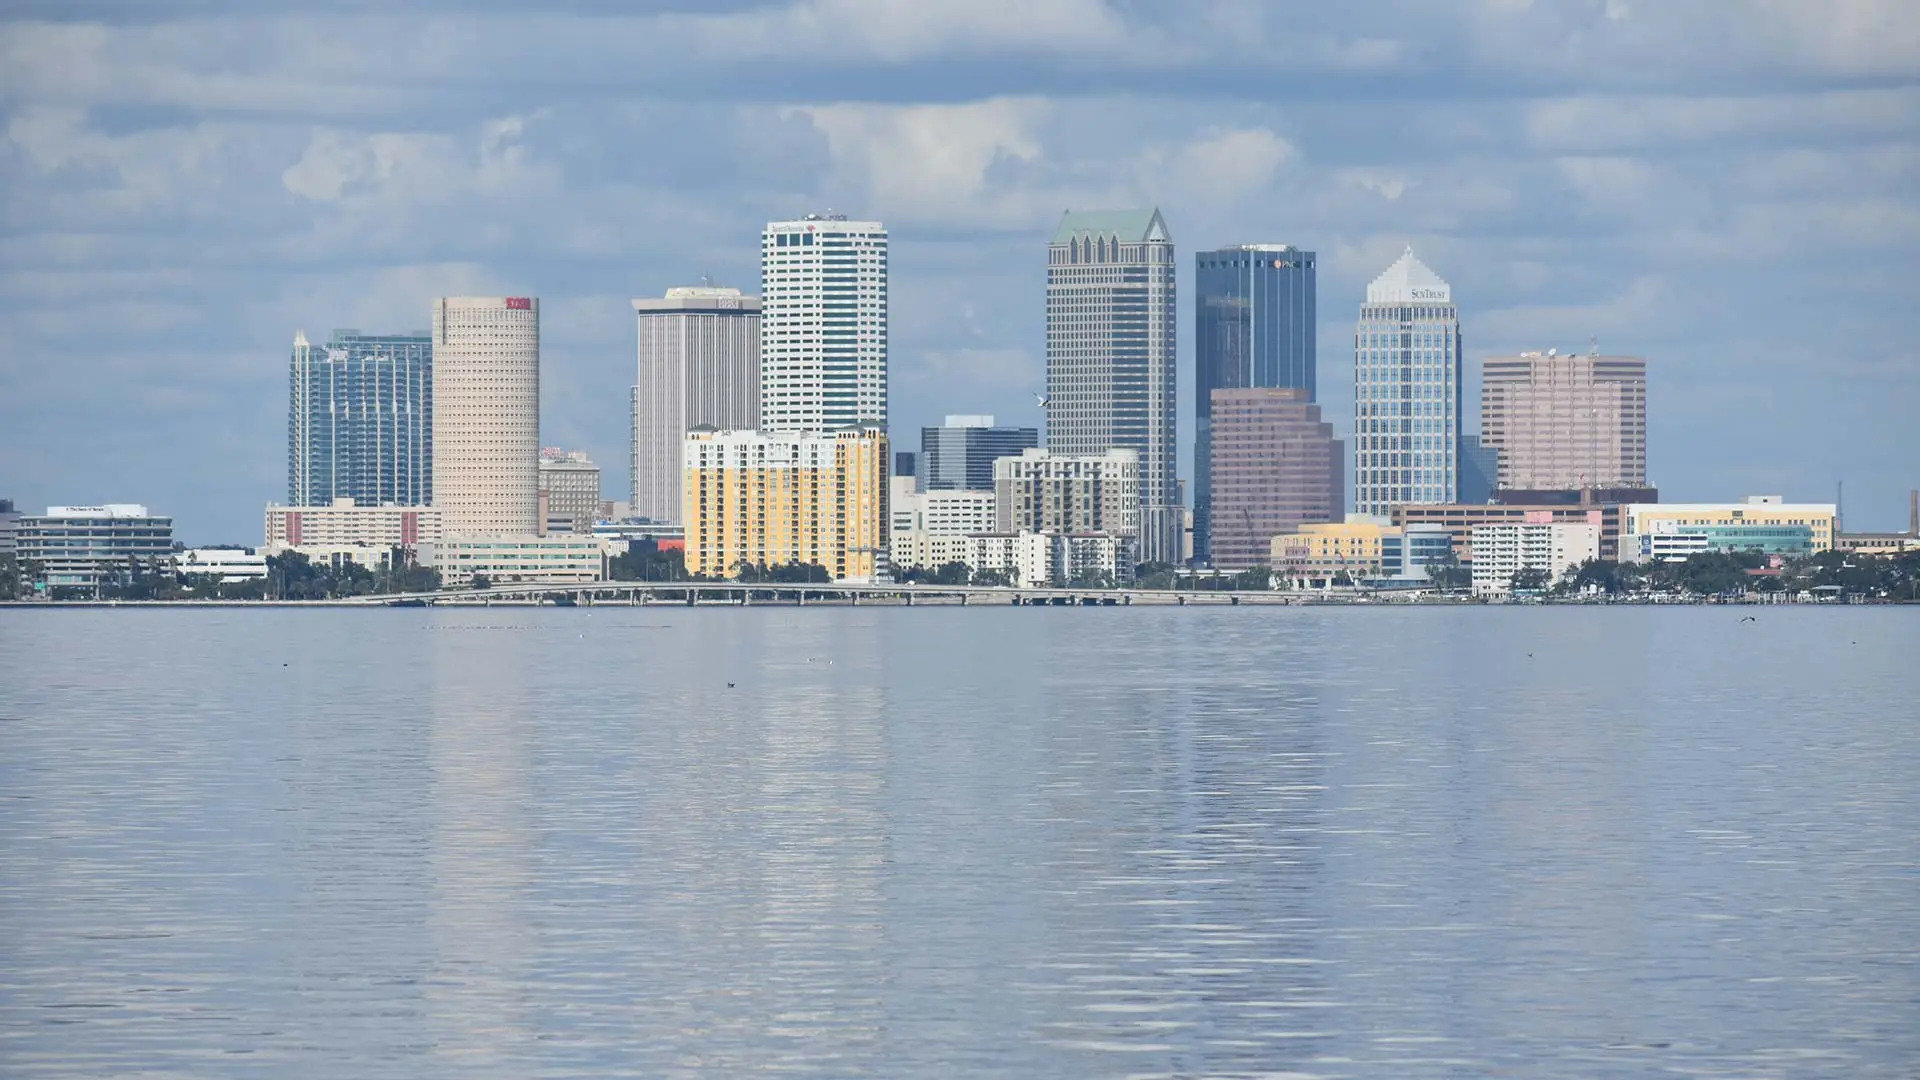 Skyline view of Tampa, FL across Tampa Bay.